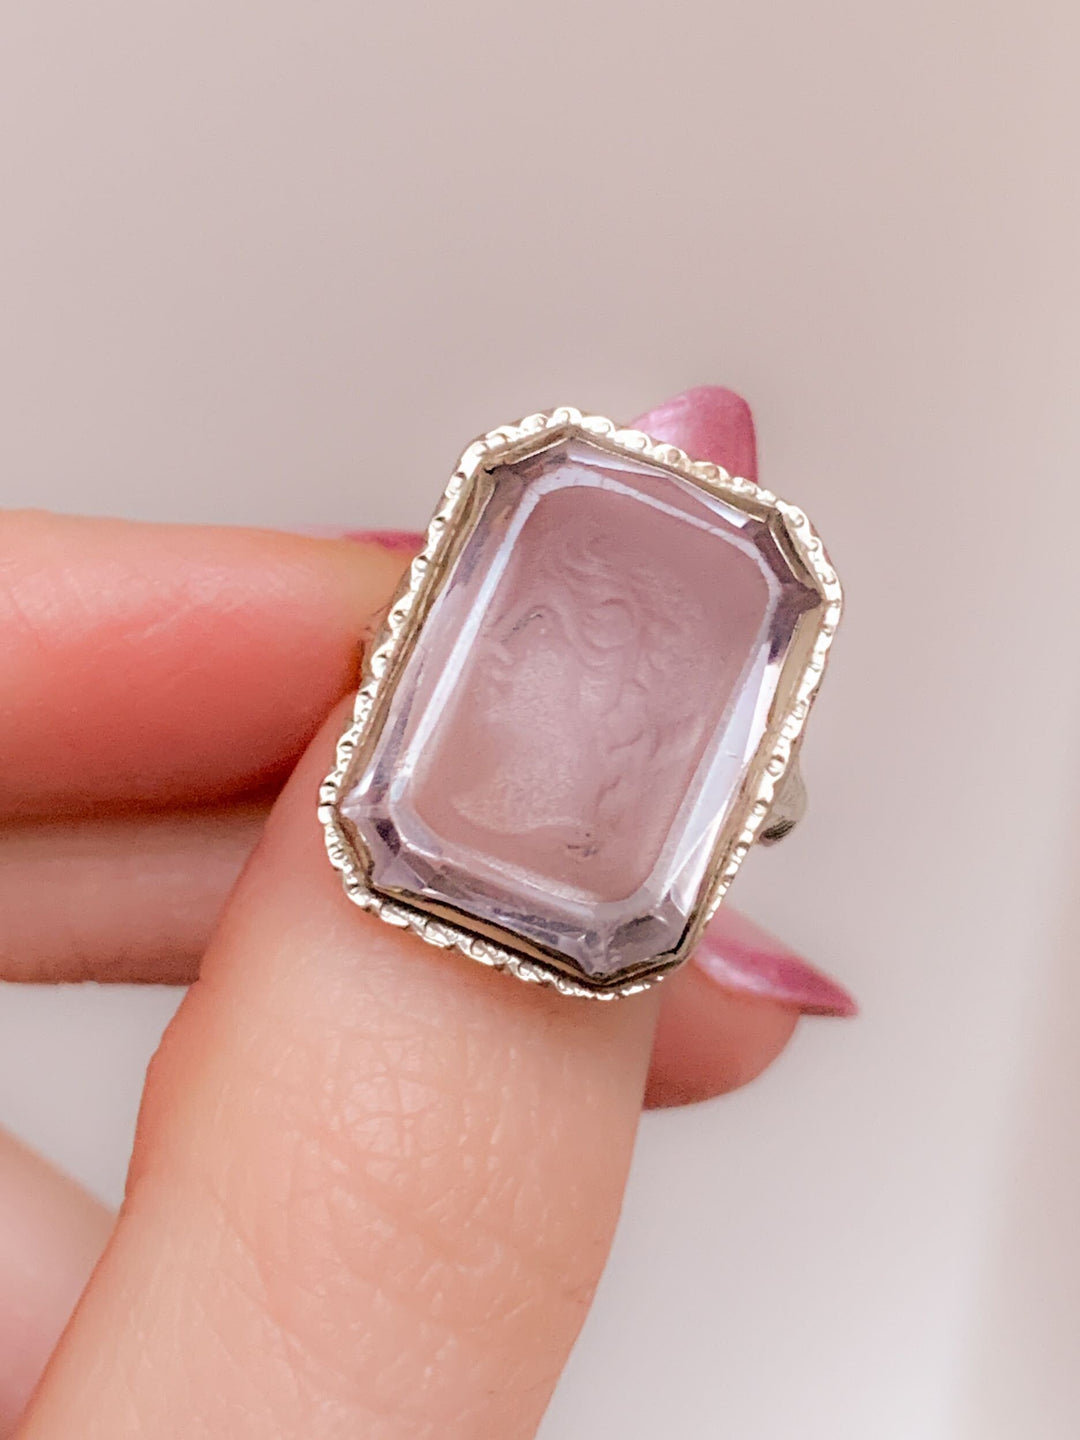 Stunning Art Deco Carved Amethyst Cameo Ring in 14k